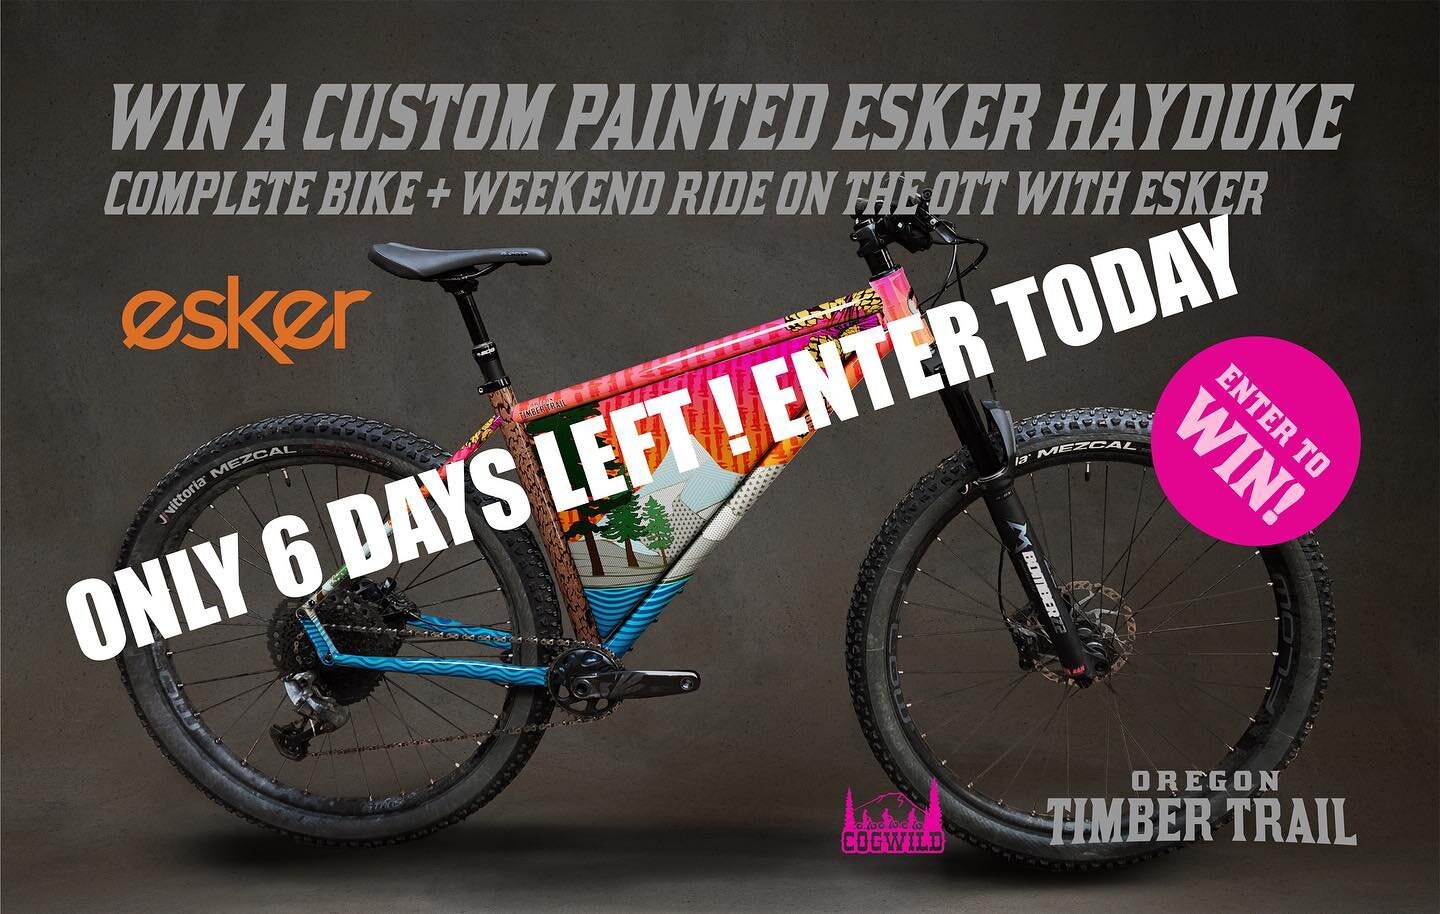 ONLY 6 DAYS LEFT to win an incredible custom painted Esker Hayduke complete bike, designed By artist Chris Conlin @chris_conlin paired with a matching Rogue Panda frame bag.

But wait, there's more! 🌟 The lucky winner will also embark on a weekend t